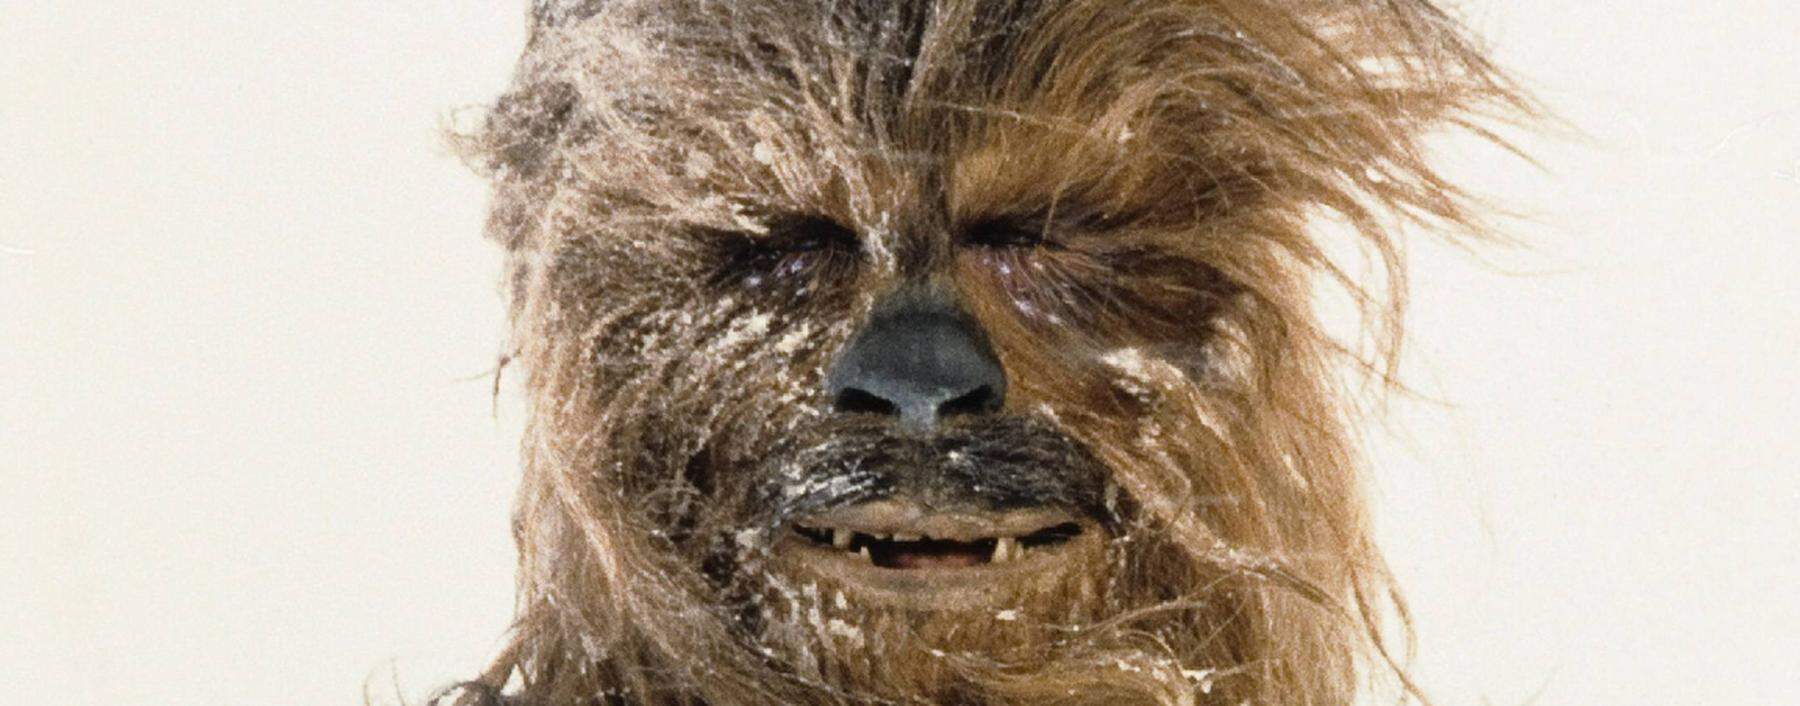 Peter Mayhew as Chewbacca Star Wars Episode V The Empire Strikes Back 1980 Photo credit Luca